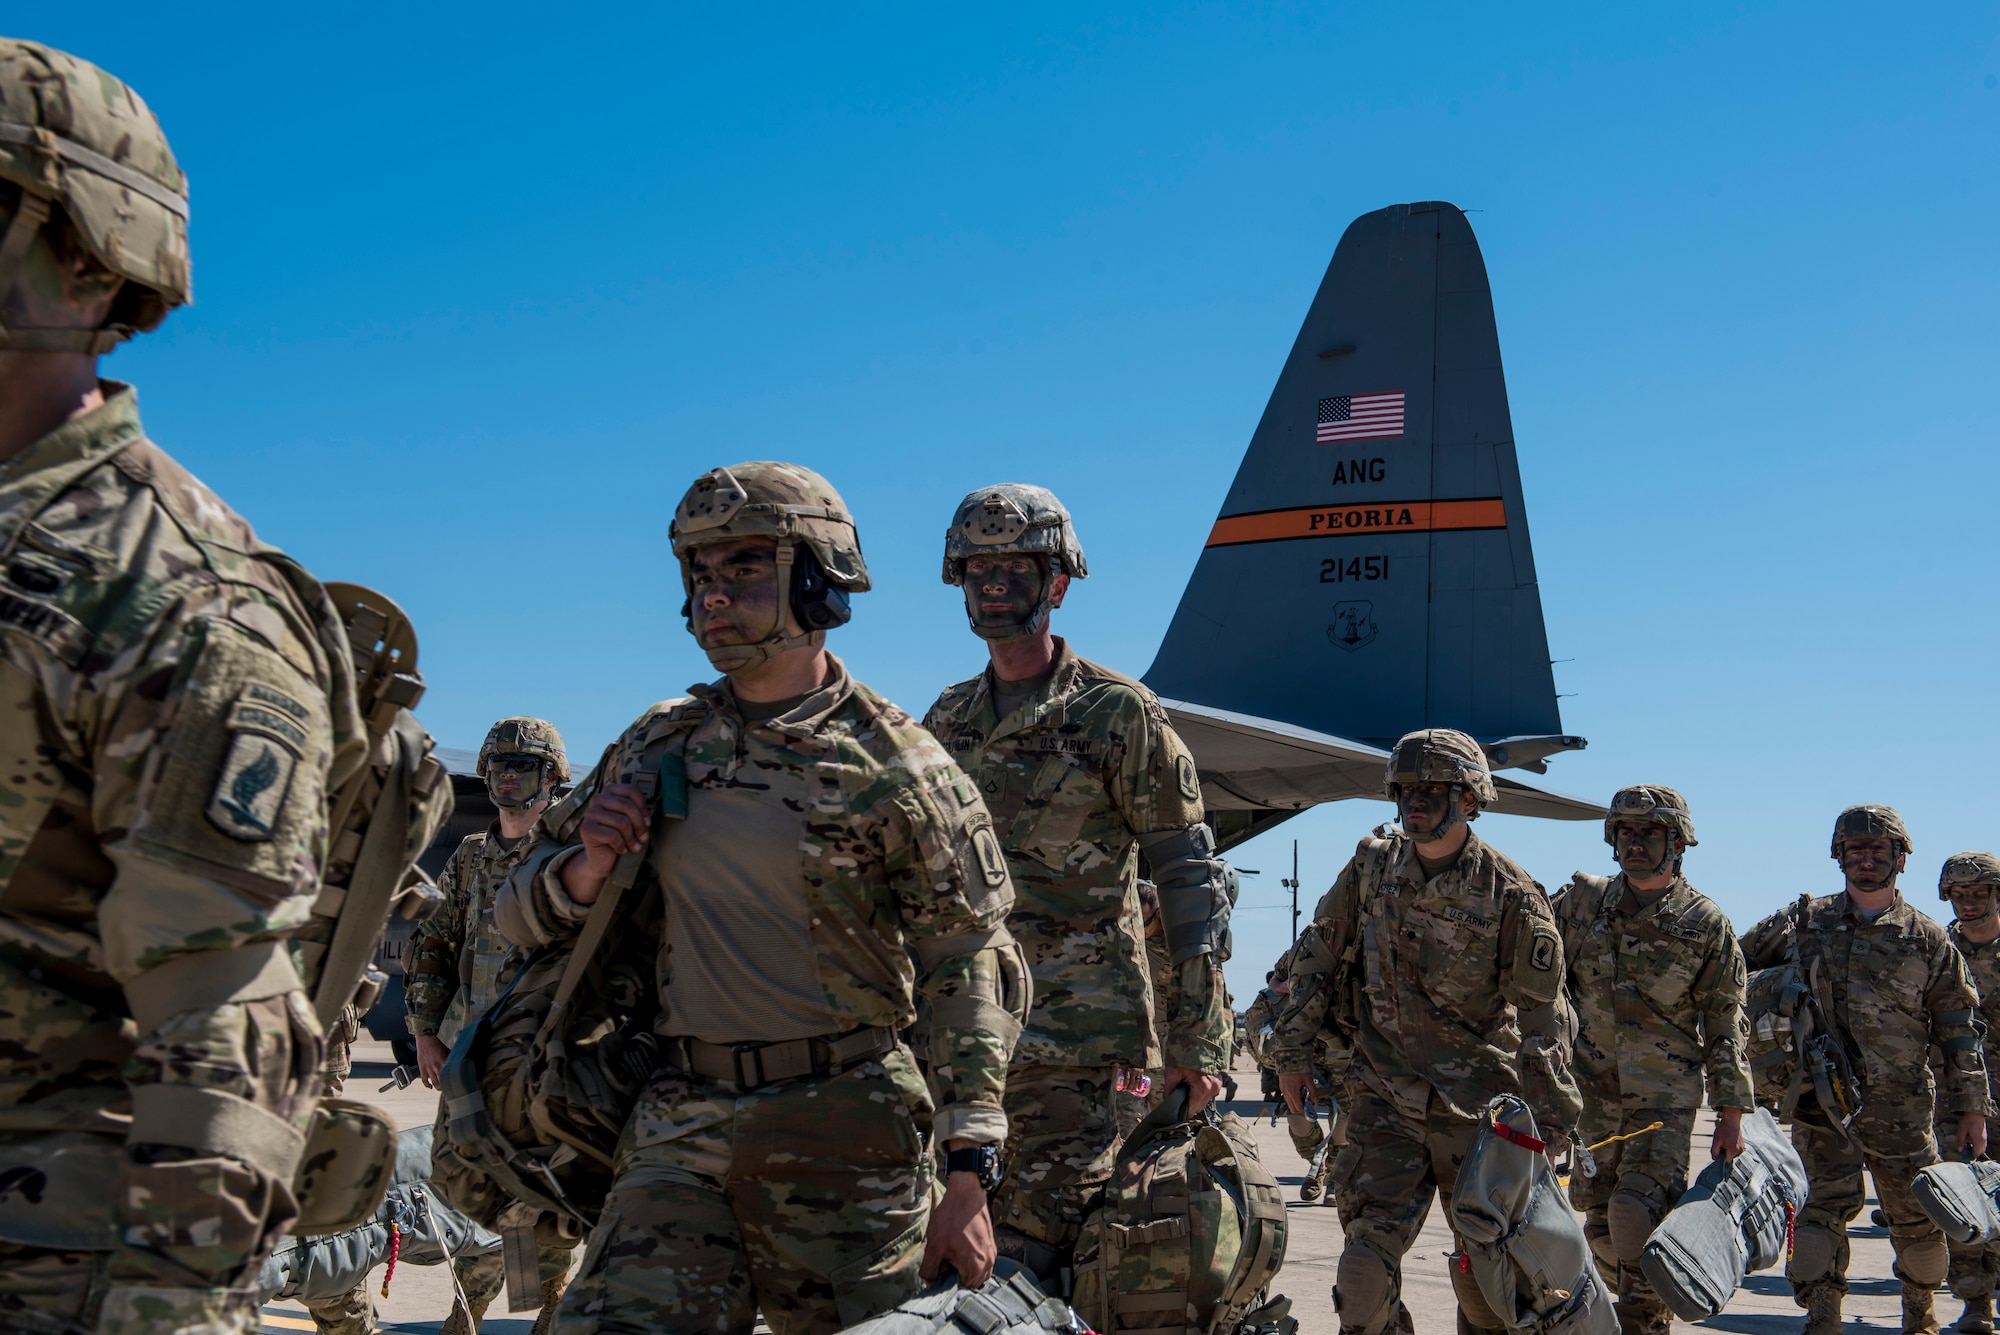 U.S. Army paratroopers from the Texas Army National Guard 1st Battalion (Airborne), 143rd Infantry Regiment, stationed at Camp Swift in Bastrop, Texas, prepare to load onto a C-130H Hercules aircraft, during the Minuteman Joint Forcible Entry exercise at Naval Air Station Joint Reserve Base Fort Worth, Texas, April 20, 2018.